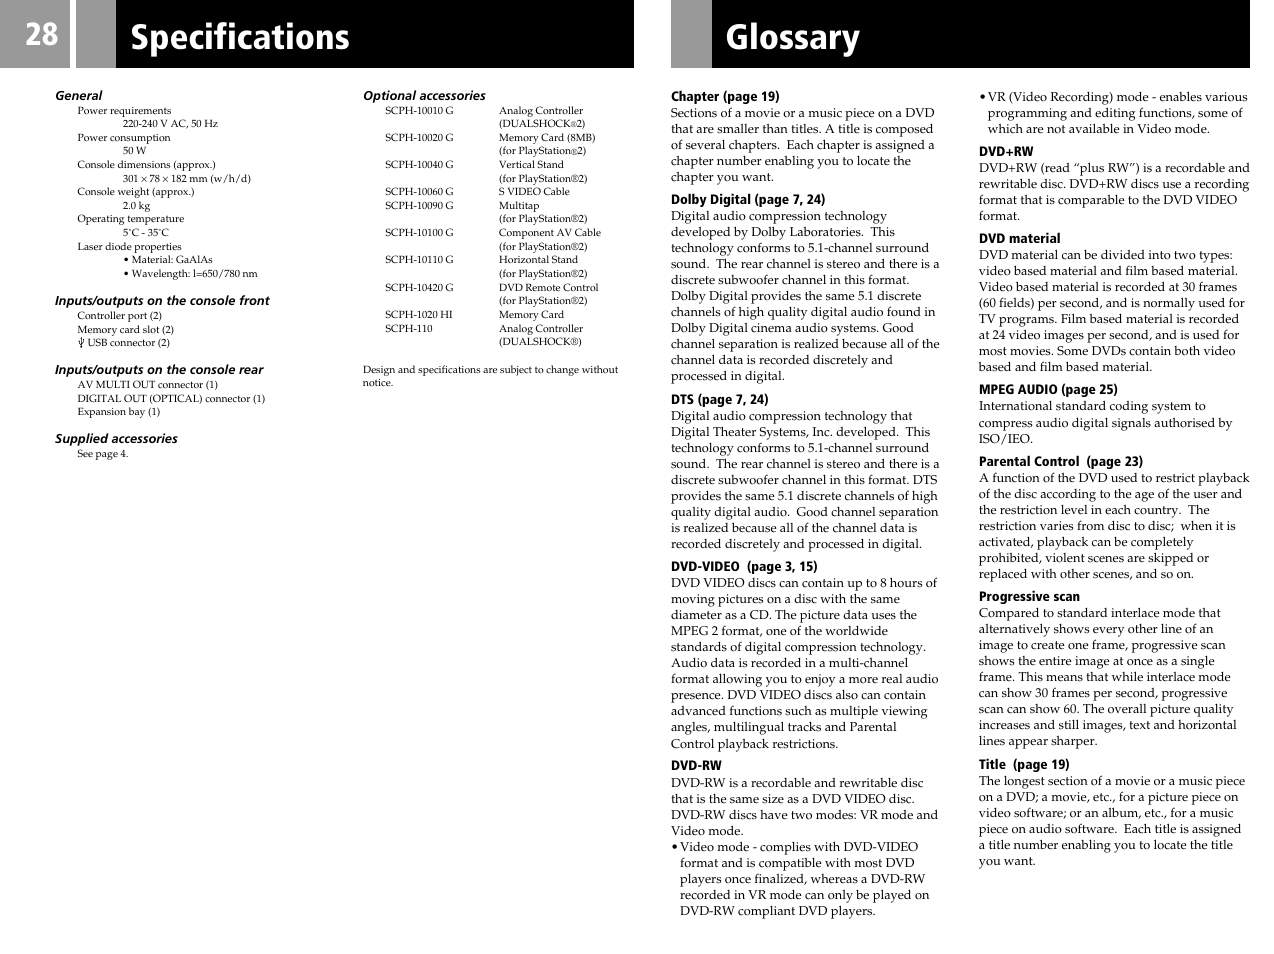 Glossary, Specifications | Sony SCPH-50006 User Manual | Page 28 / 56